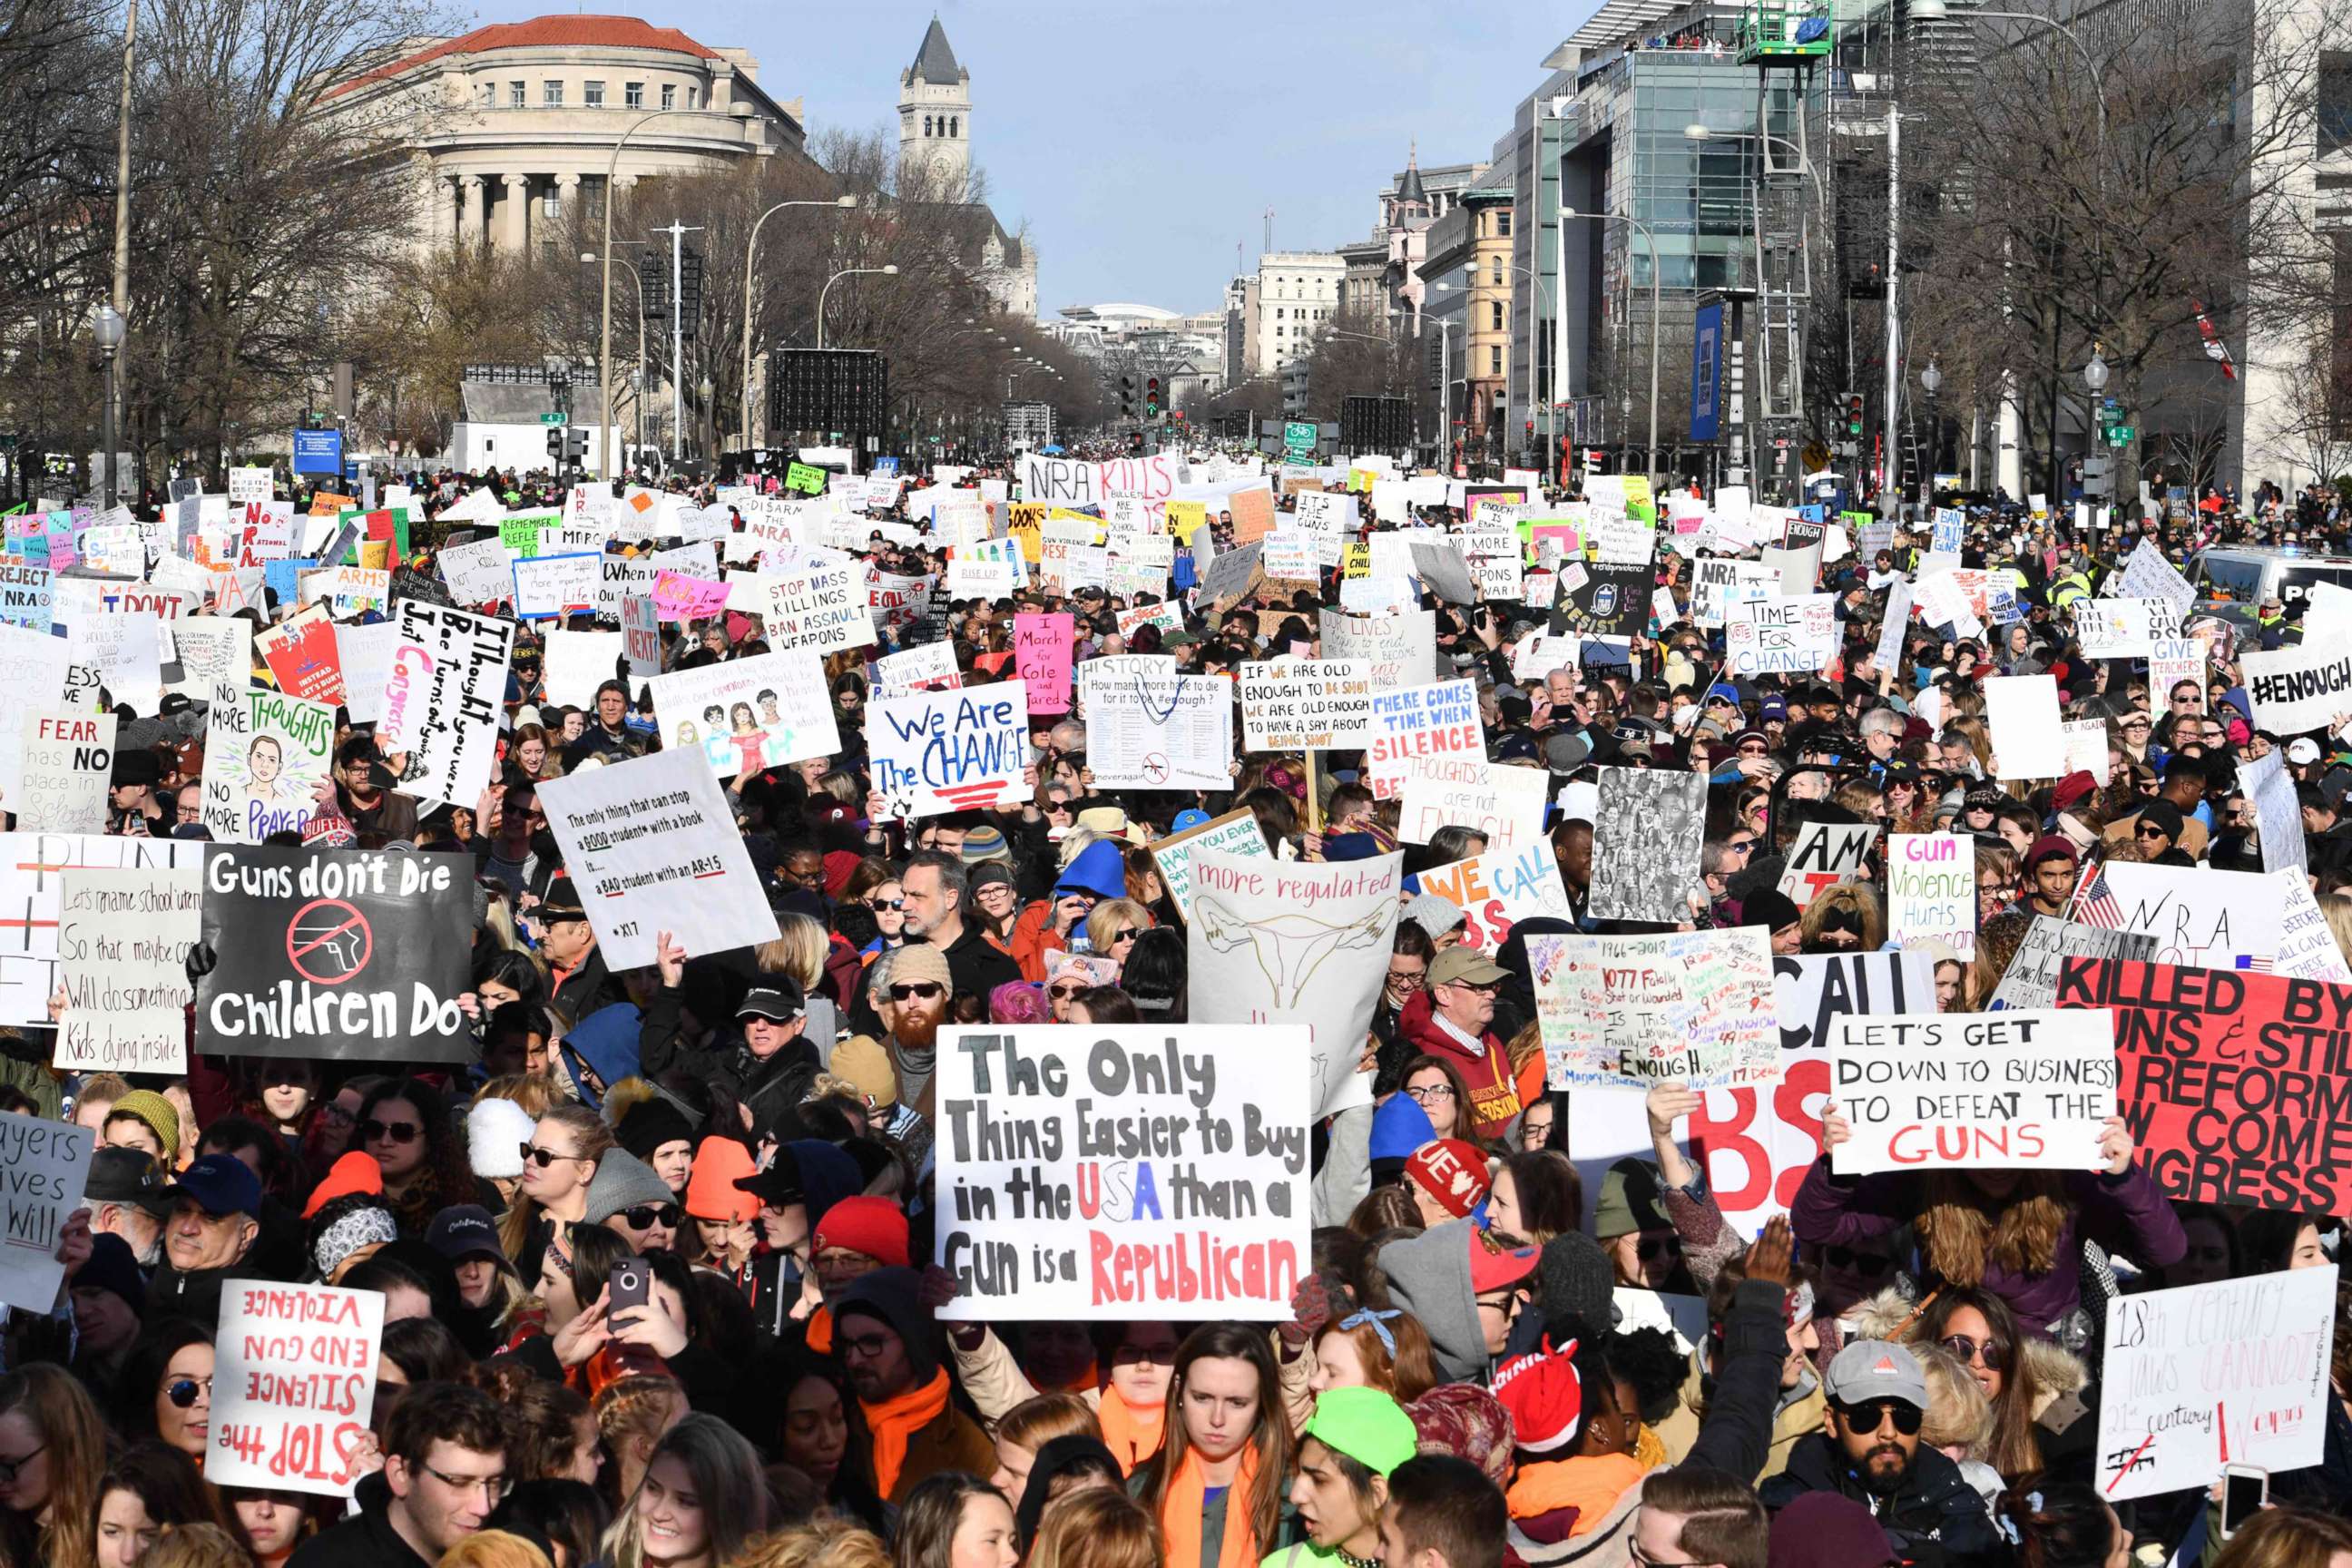 PHOTO: People arrive for the March for Our Lives rally against gun violence in Washington, D.C., March 24, 2018.
